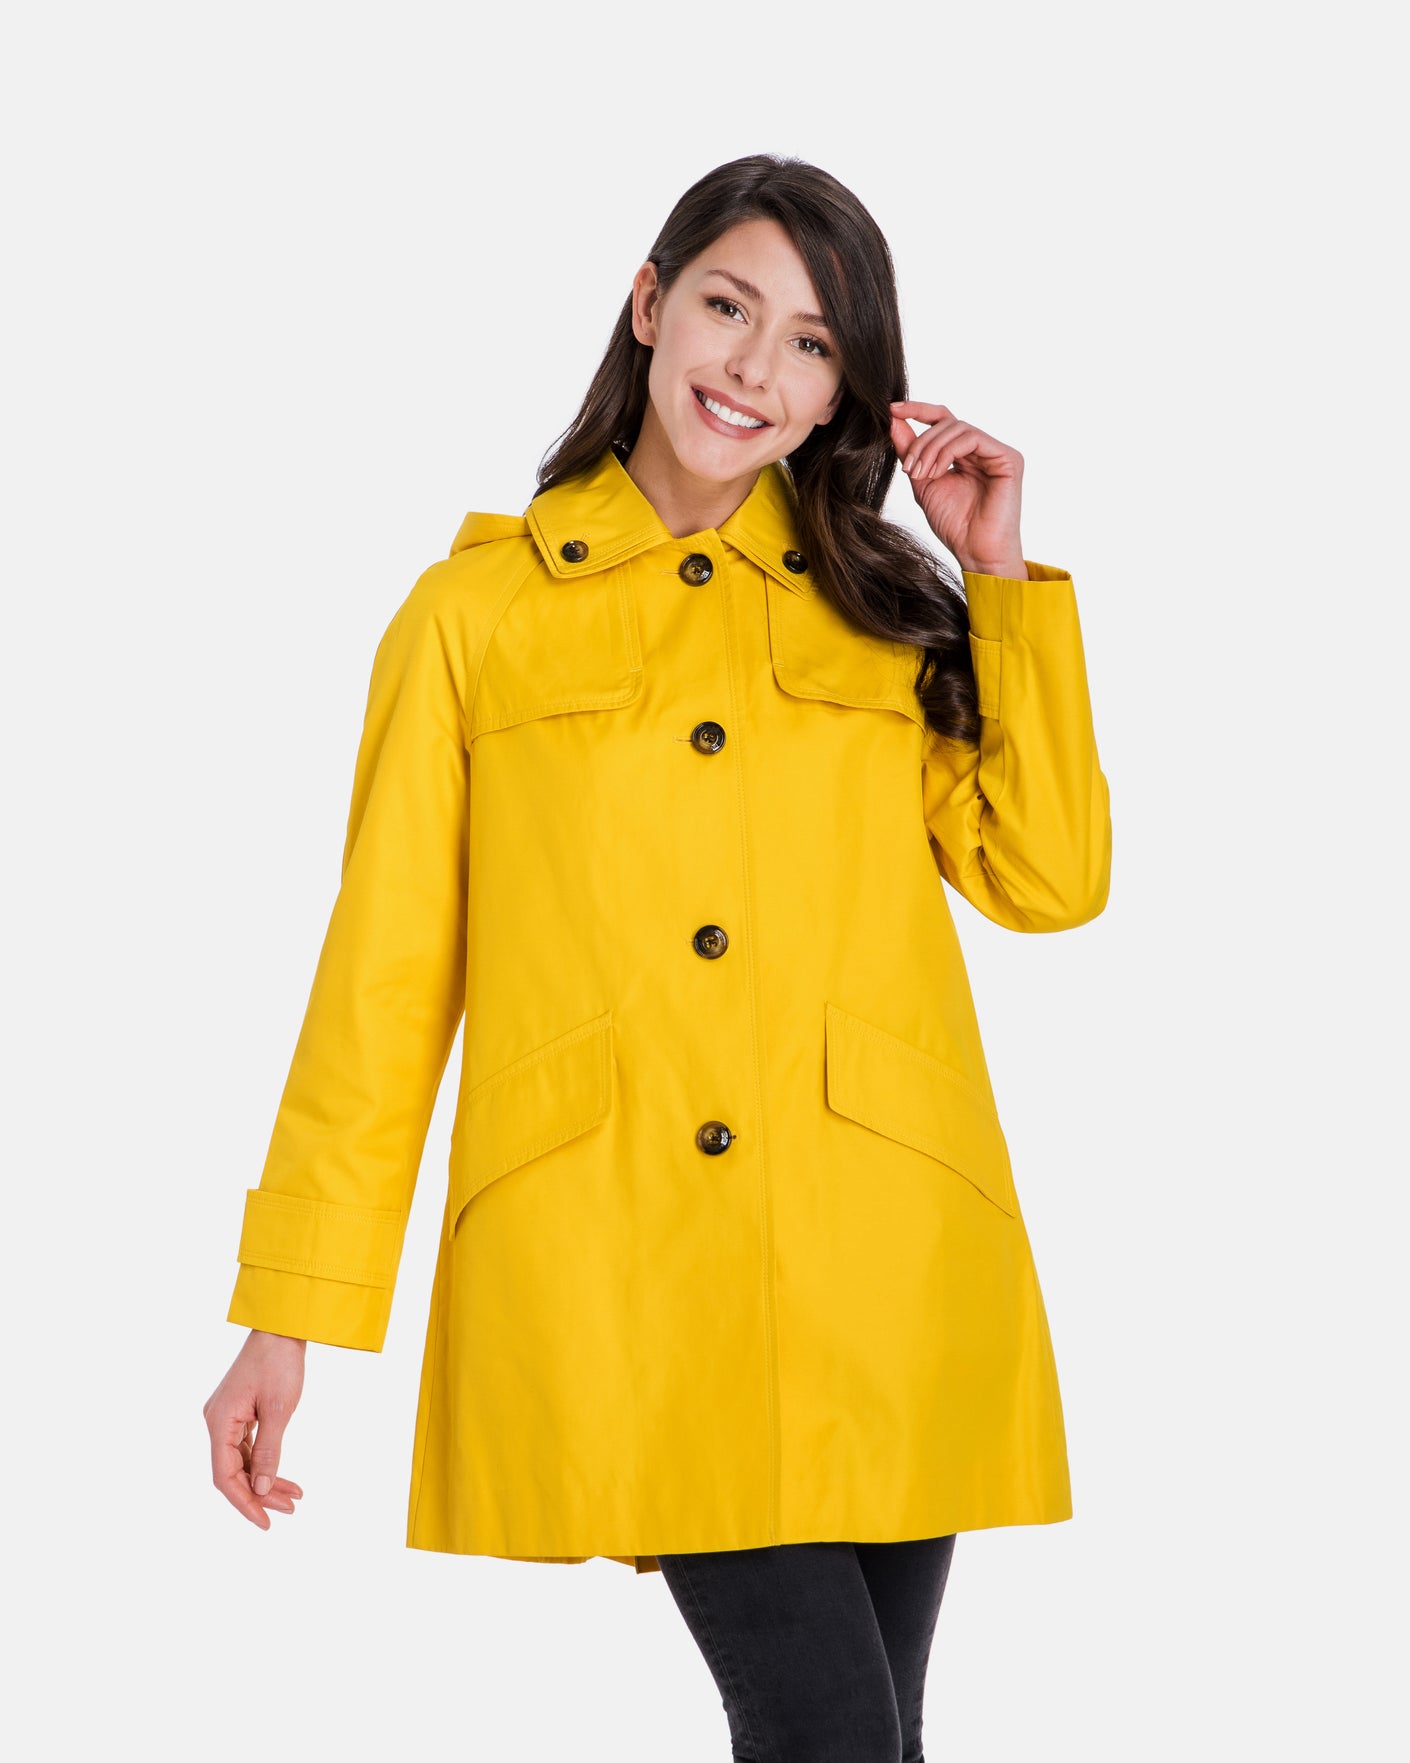 Lemon || woman wearing lemon colored Single Breasted Walker Coat with Detachable Hood closed front view